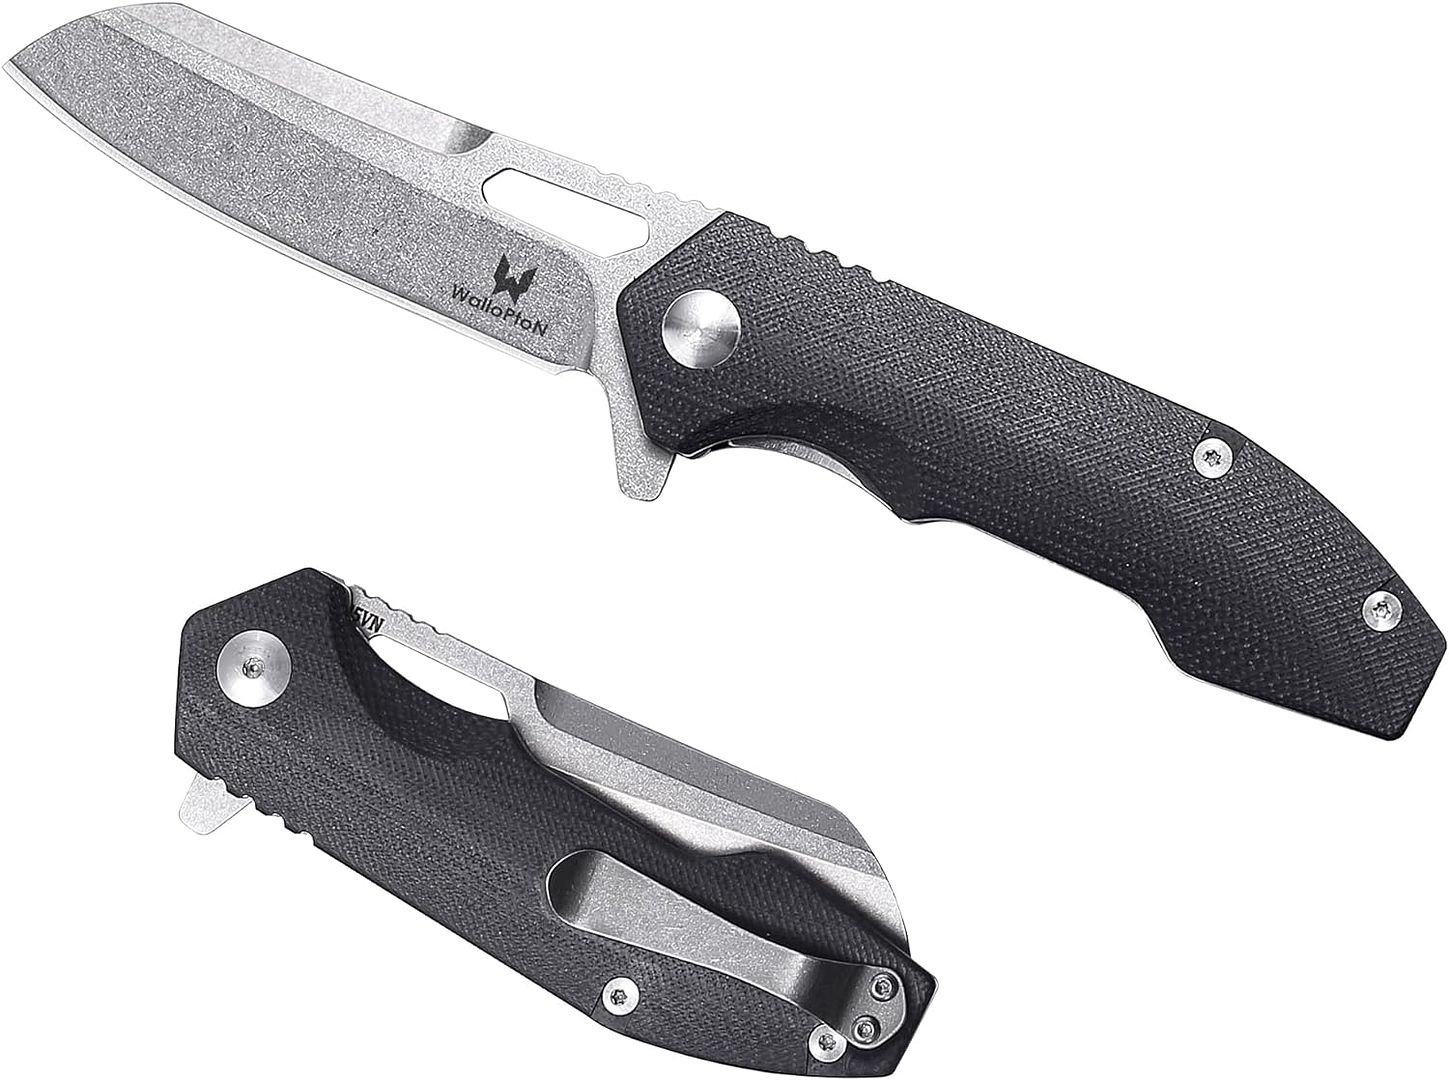 Camping Folding Knife - S35VN Powder Steel G10 Handle Comfortable Grip - Great for Cutting, Hunting, Hiking, And Survival